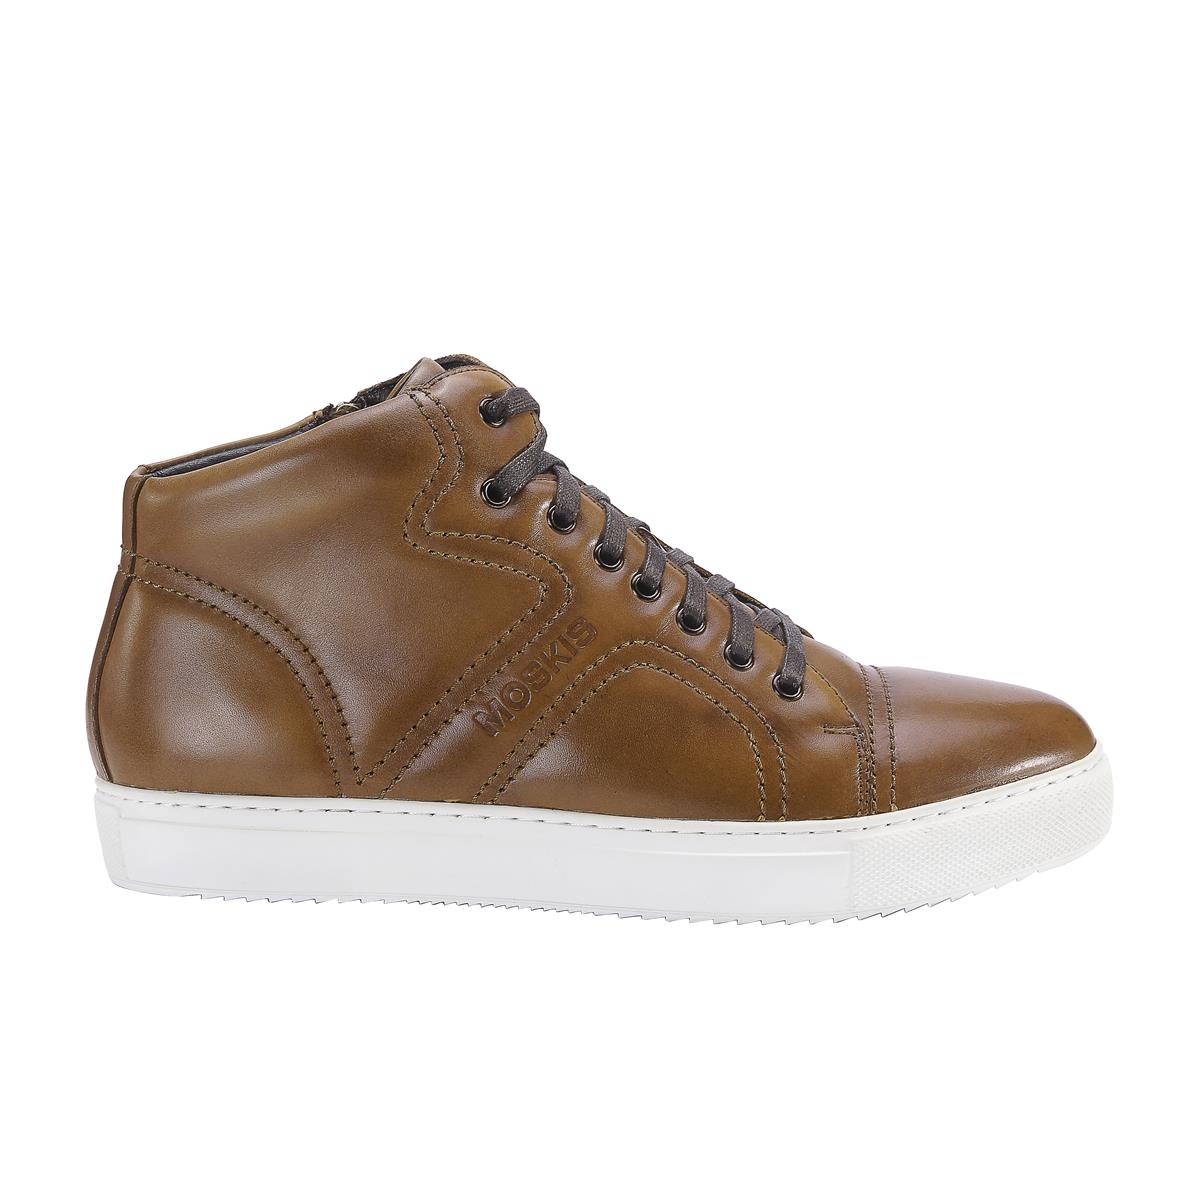 MILANO brown leather sport shoes